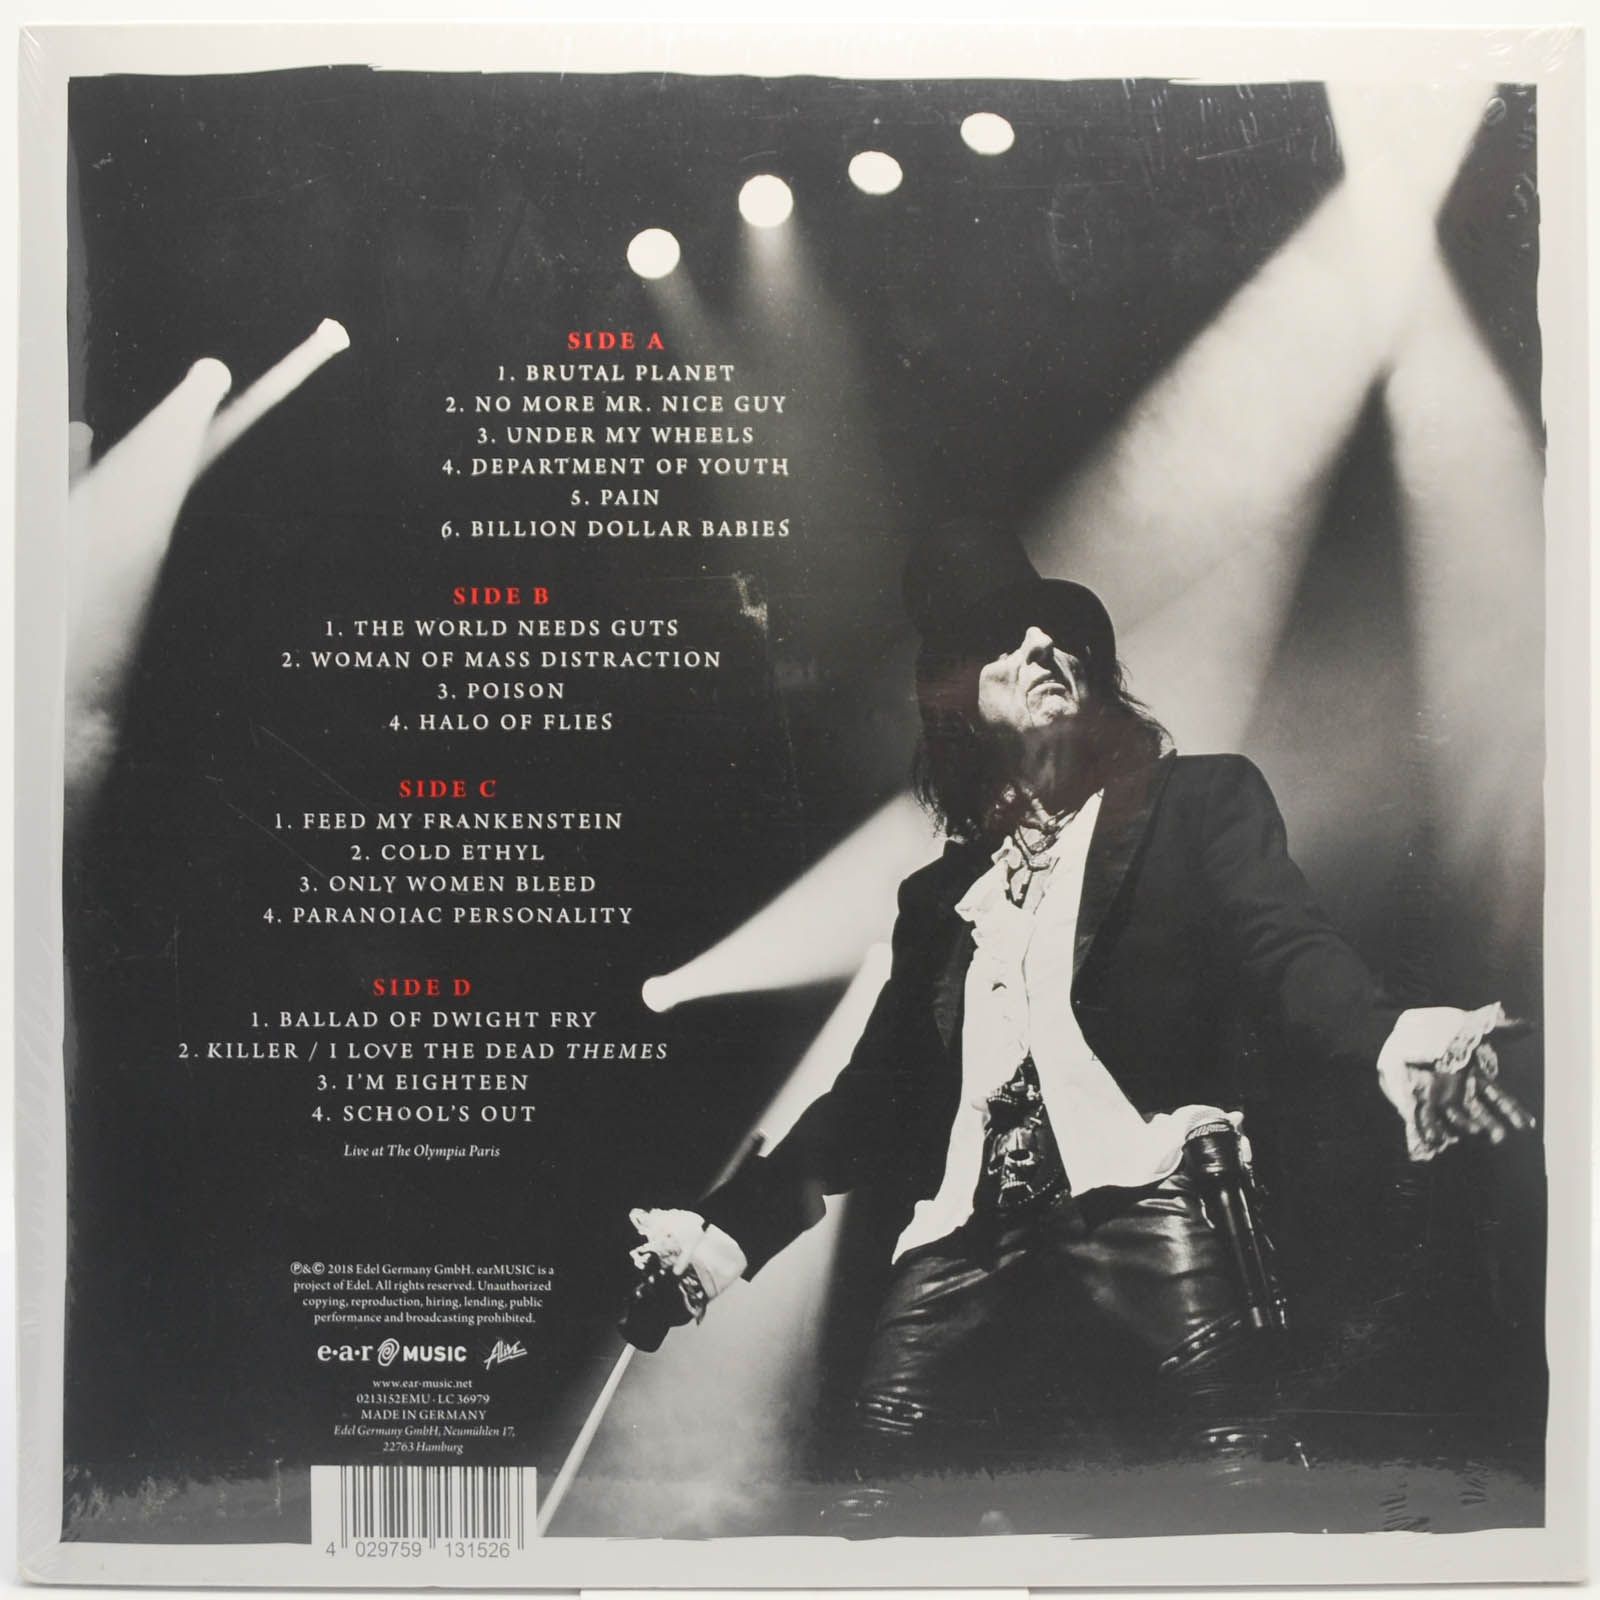 Alice Cooper — A Paranormal Evening With Alice Cooper At The Olympia Paris (2LP), 2018